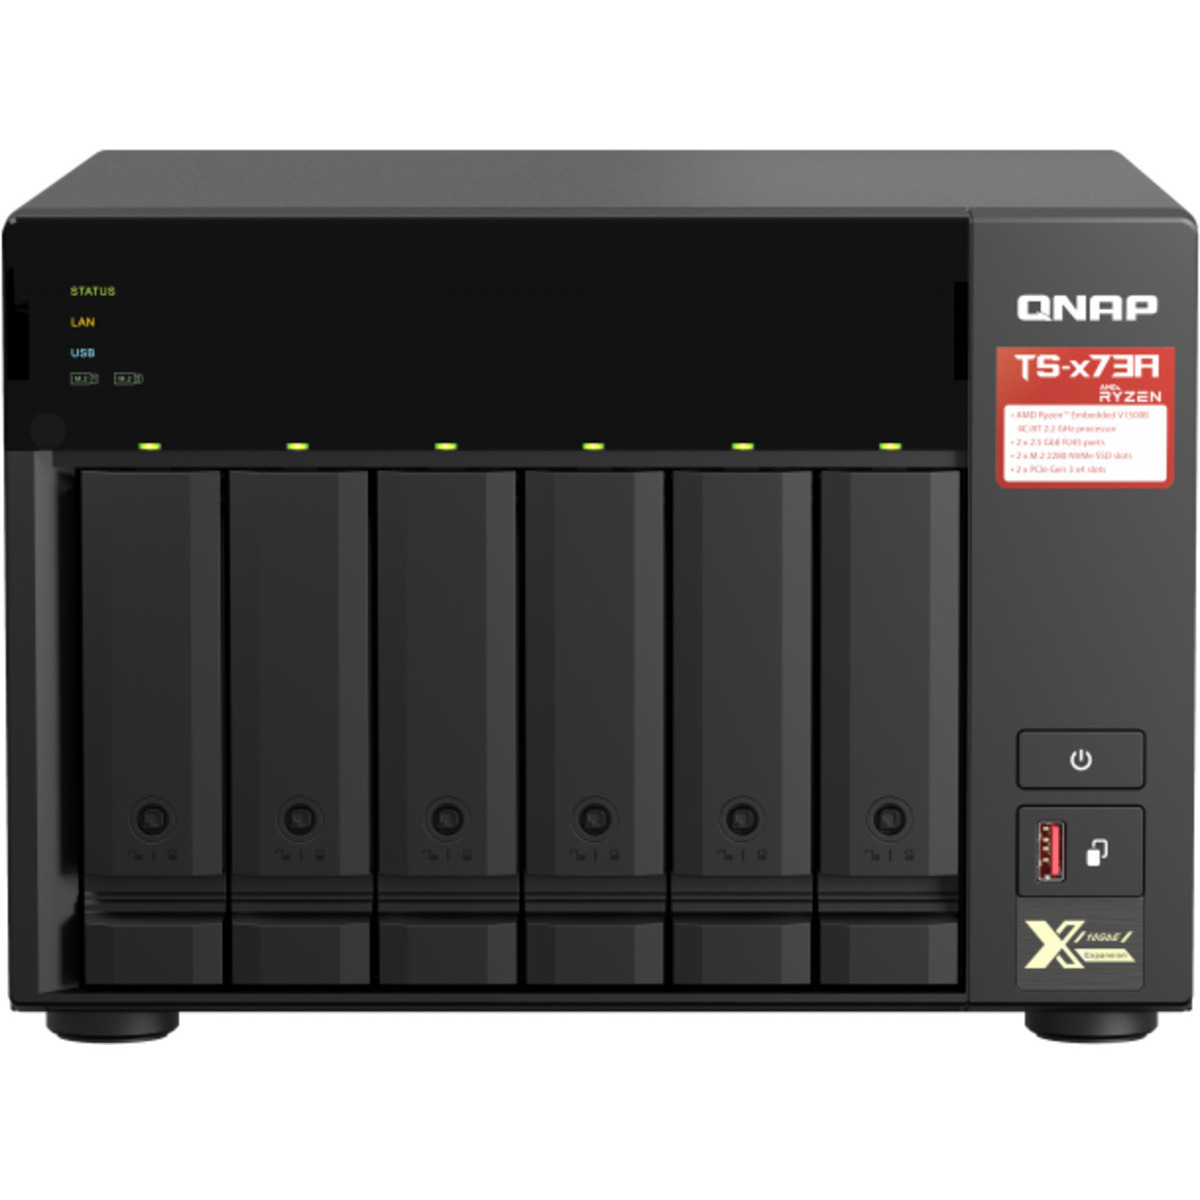 QNAP TS-673A 96tb 6-Bay Desktop Multimedia / Power User / Business NAS - Network Attached Storage Device 6x16tb Seagate IronWolf Pro ST16000NT001 3.5 7200rpm SATA 6Gb/s HDD NAS Class Drives Installed - Burn-In Tested - ON SALE TS-673A